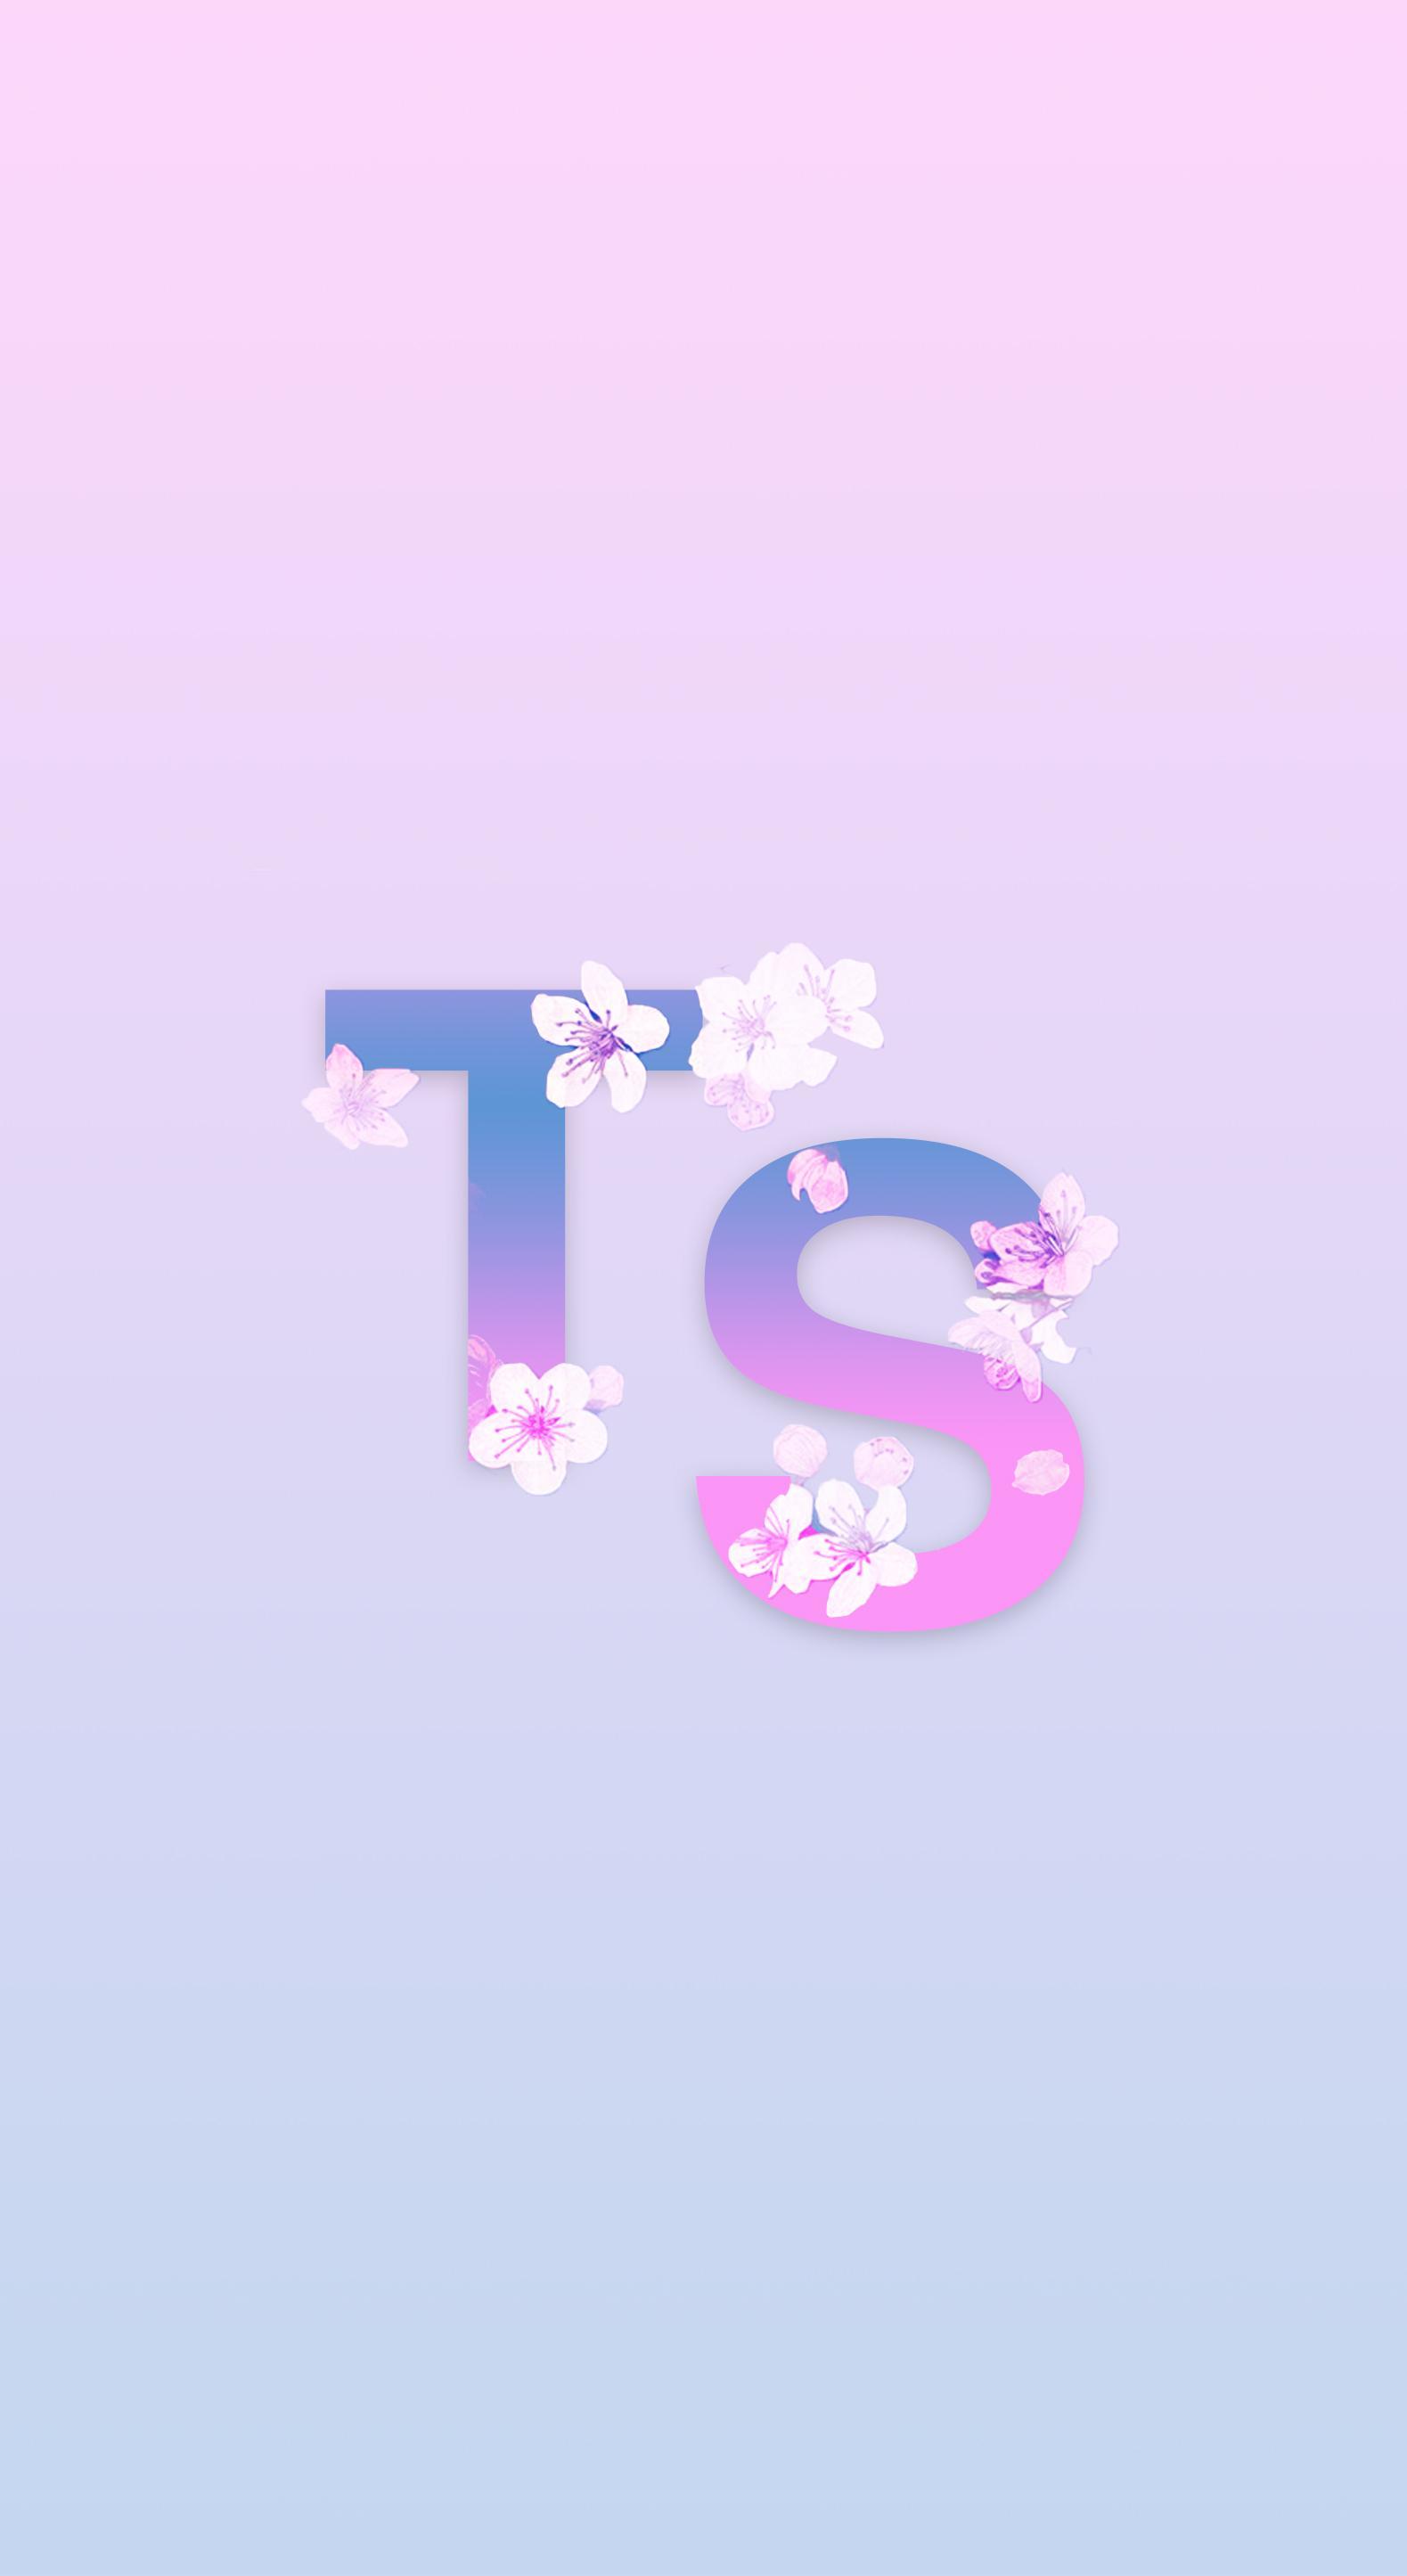 TS7 iPhone and Desktop Wallpaper by me, for you!